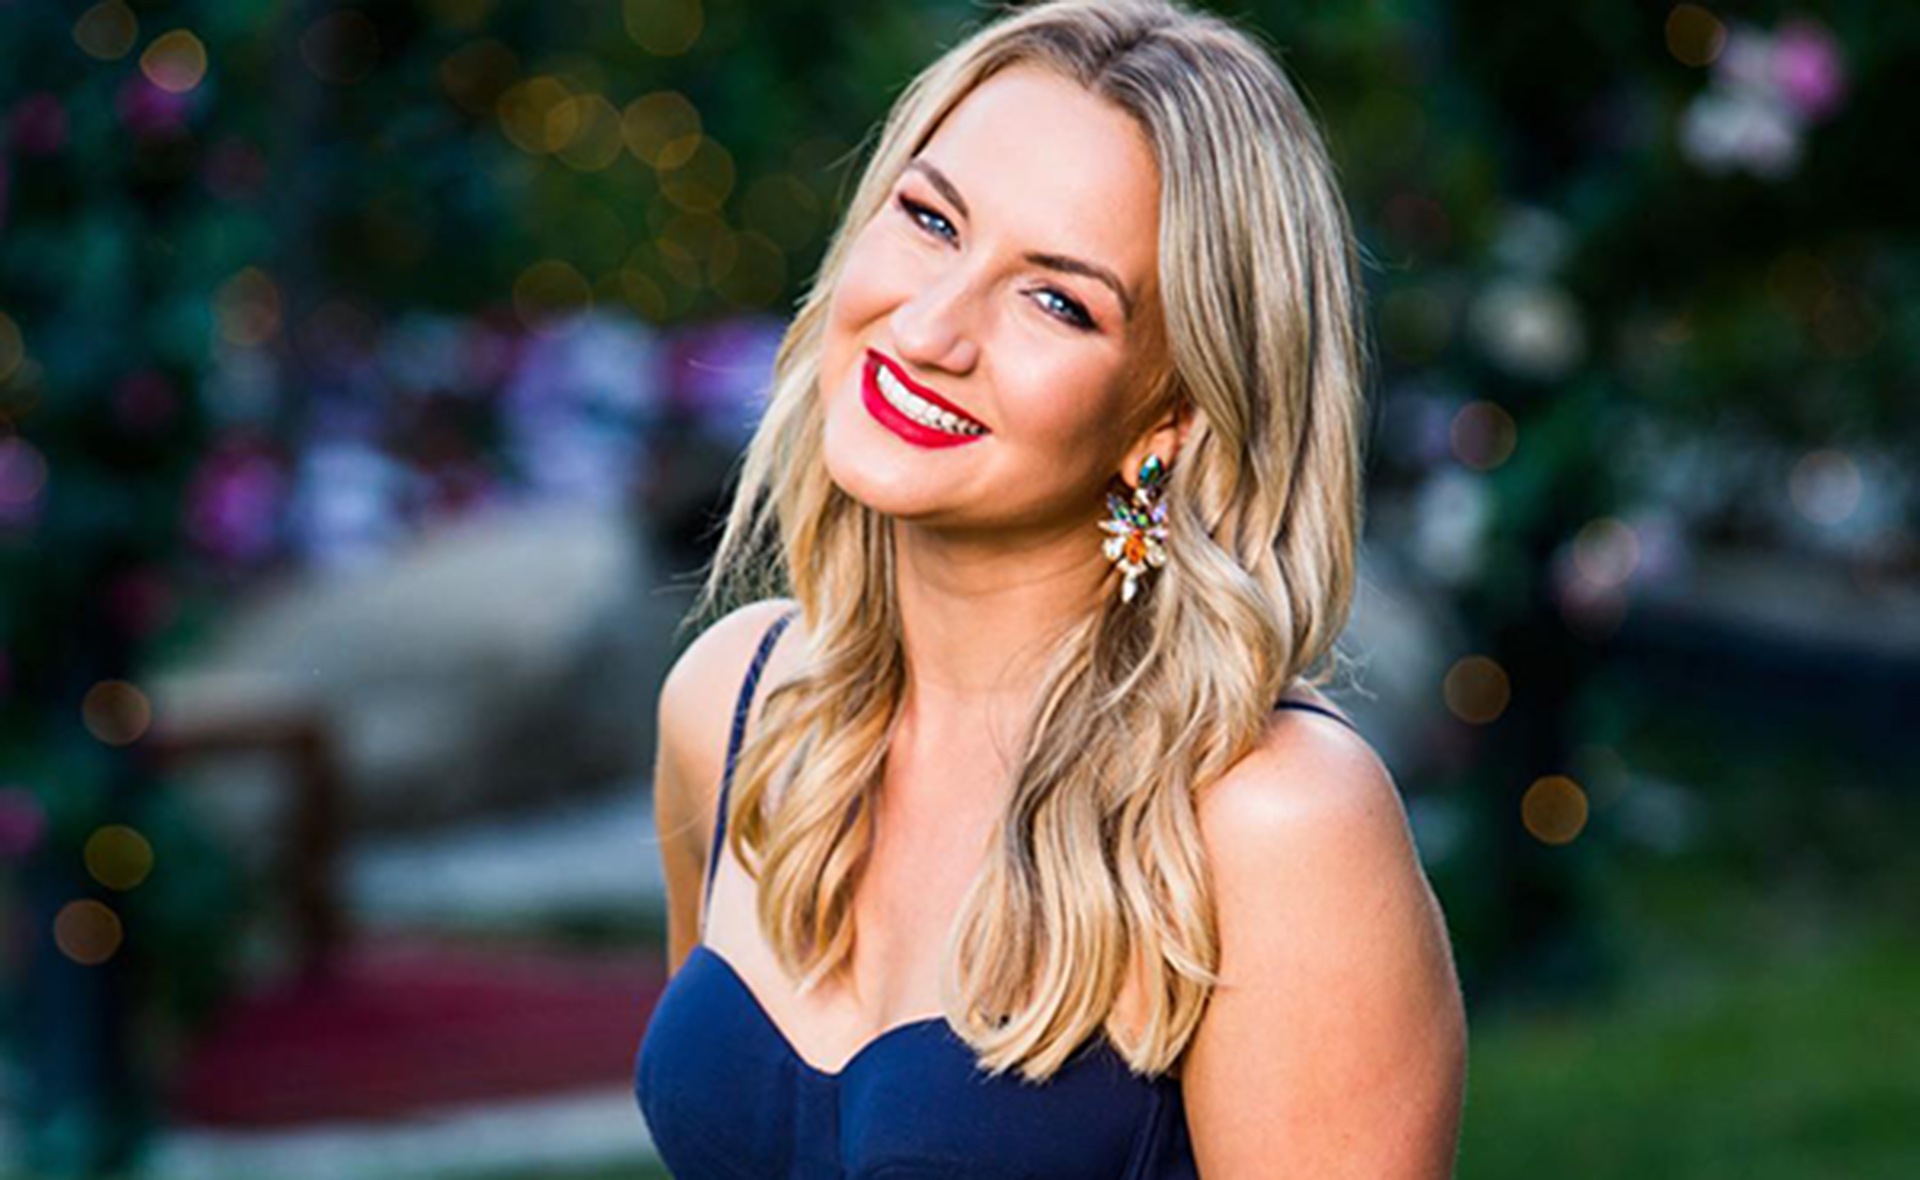 What really happens on The Bachelor when cameras aren’t rolling? Alisha spills all the details we don’t see on TV